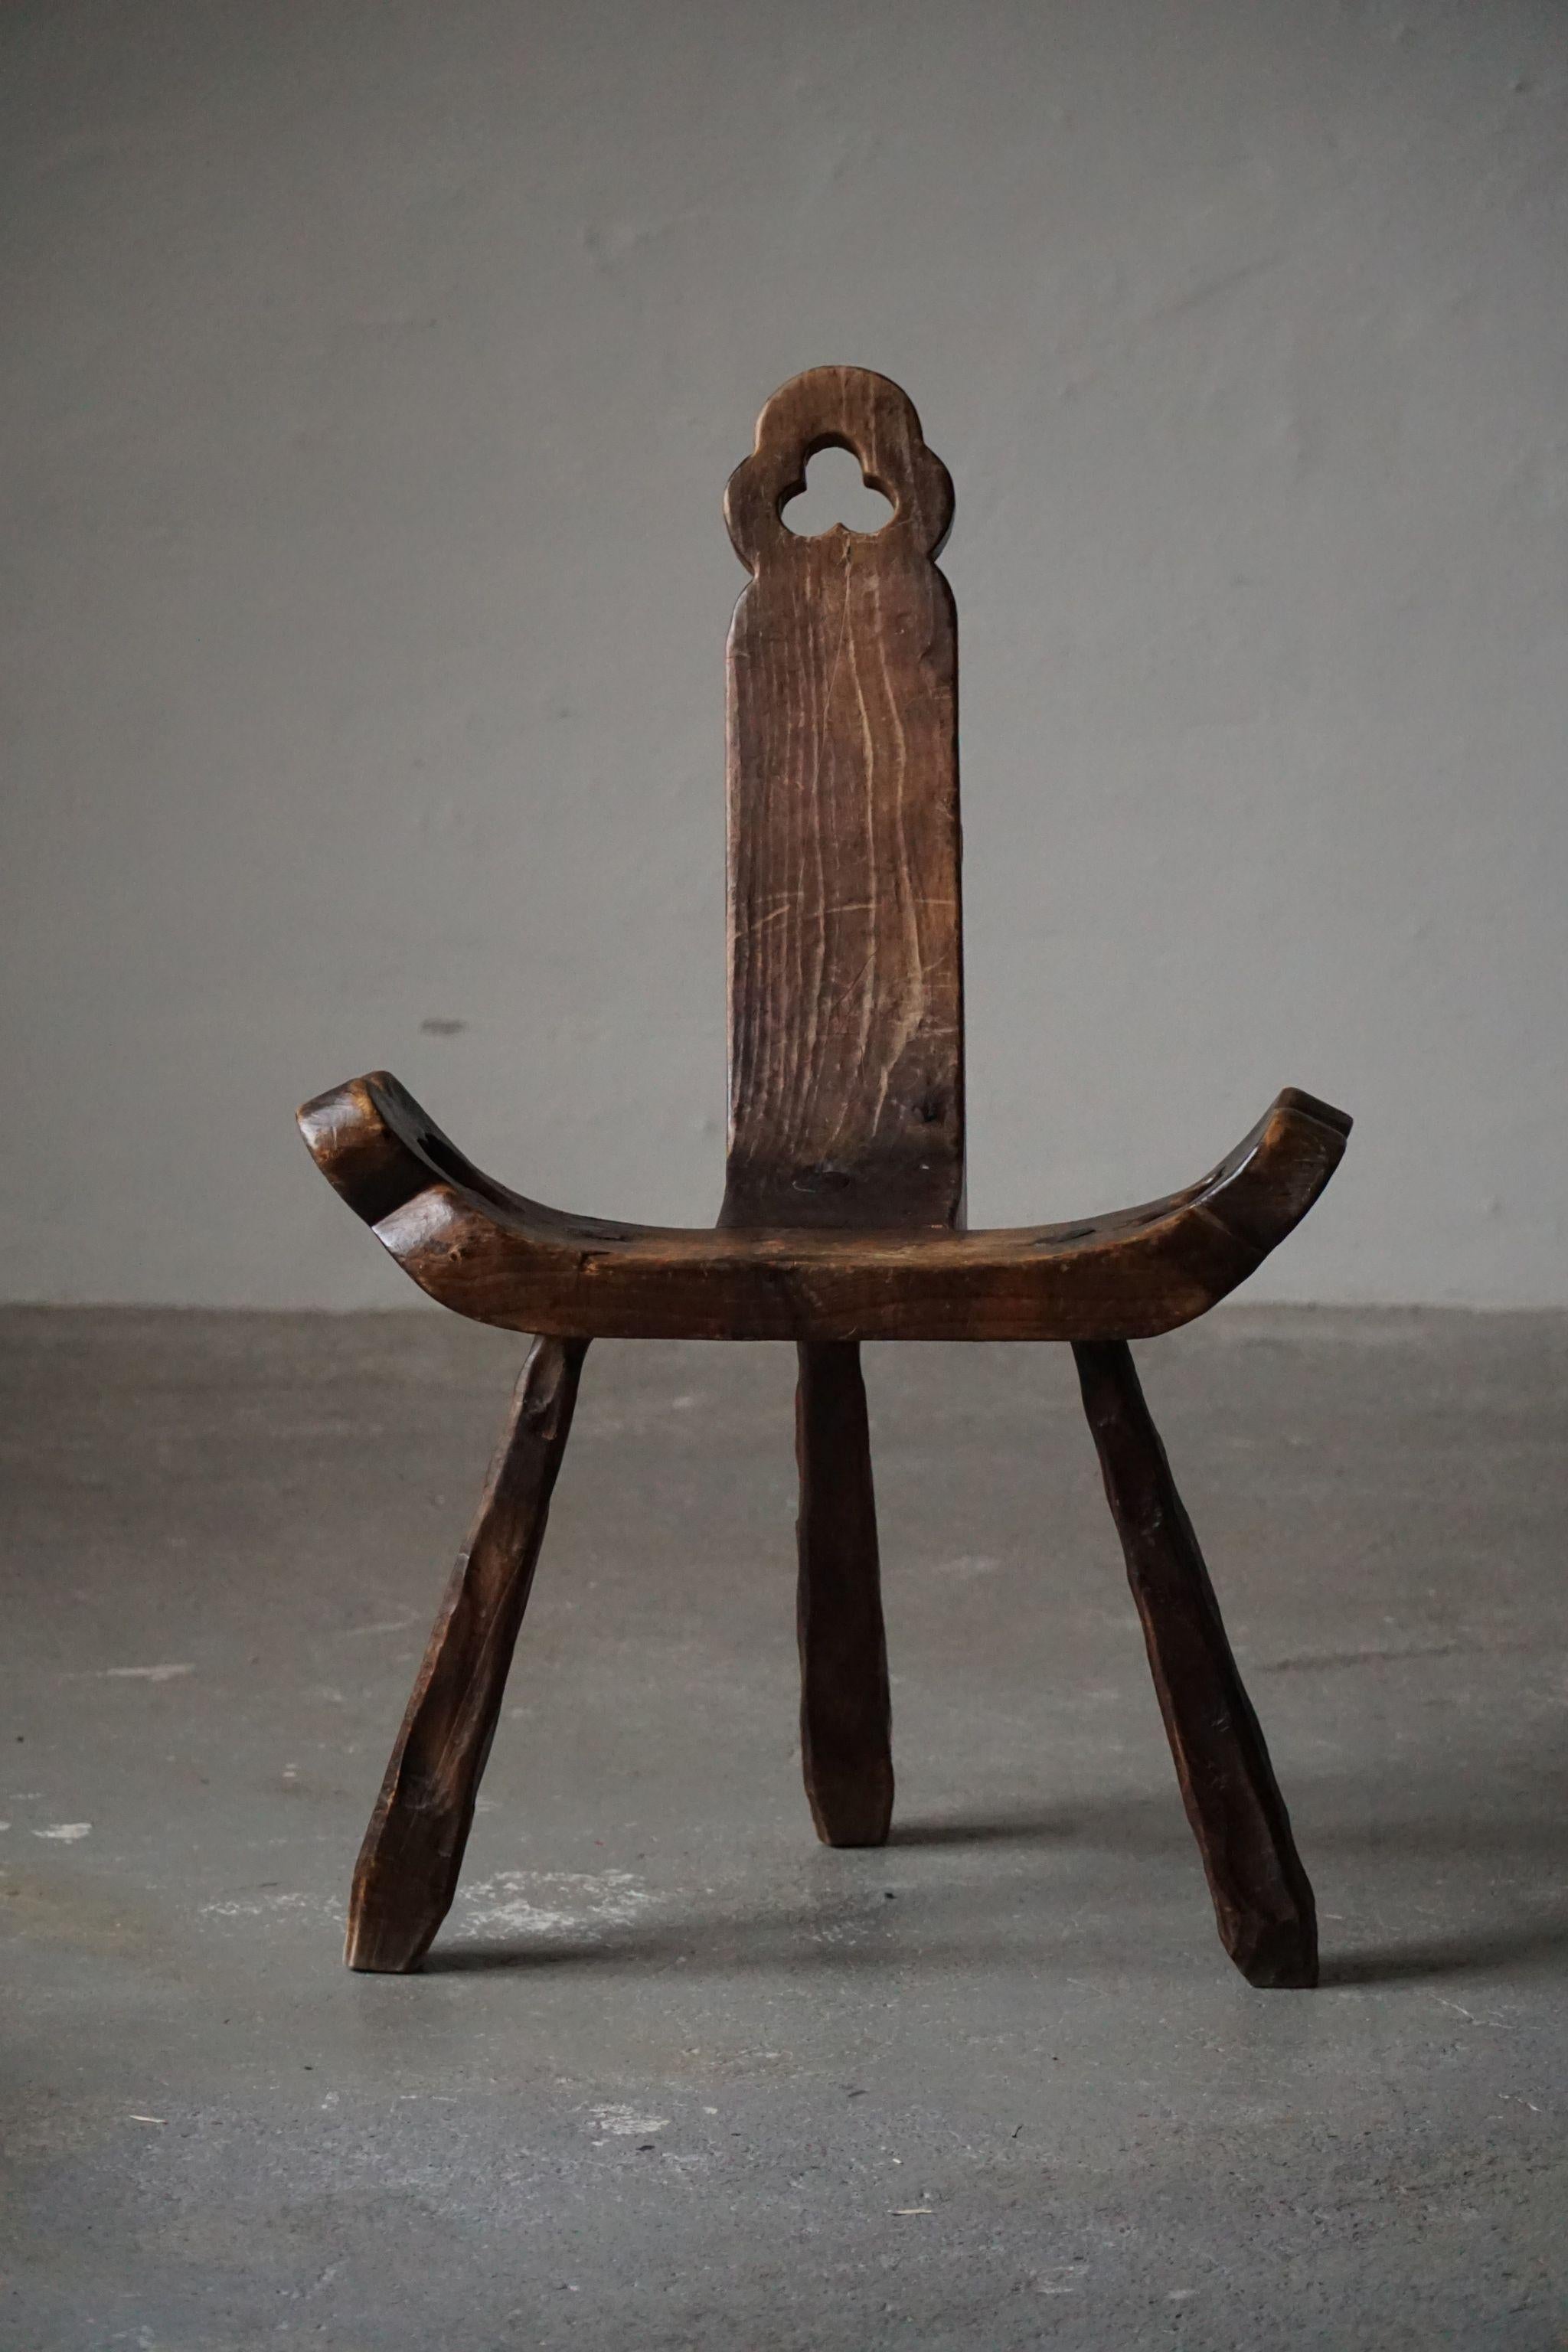 Brutalist Primitive French Wooden Carved Tripod Chair, Wabi Sabi Style, Early 20th Century